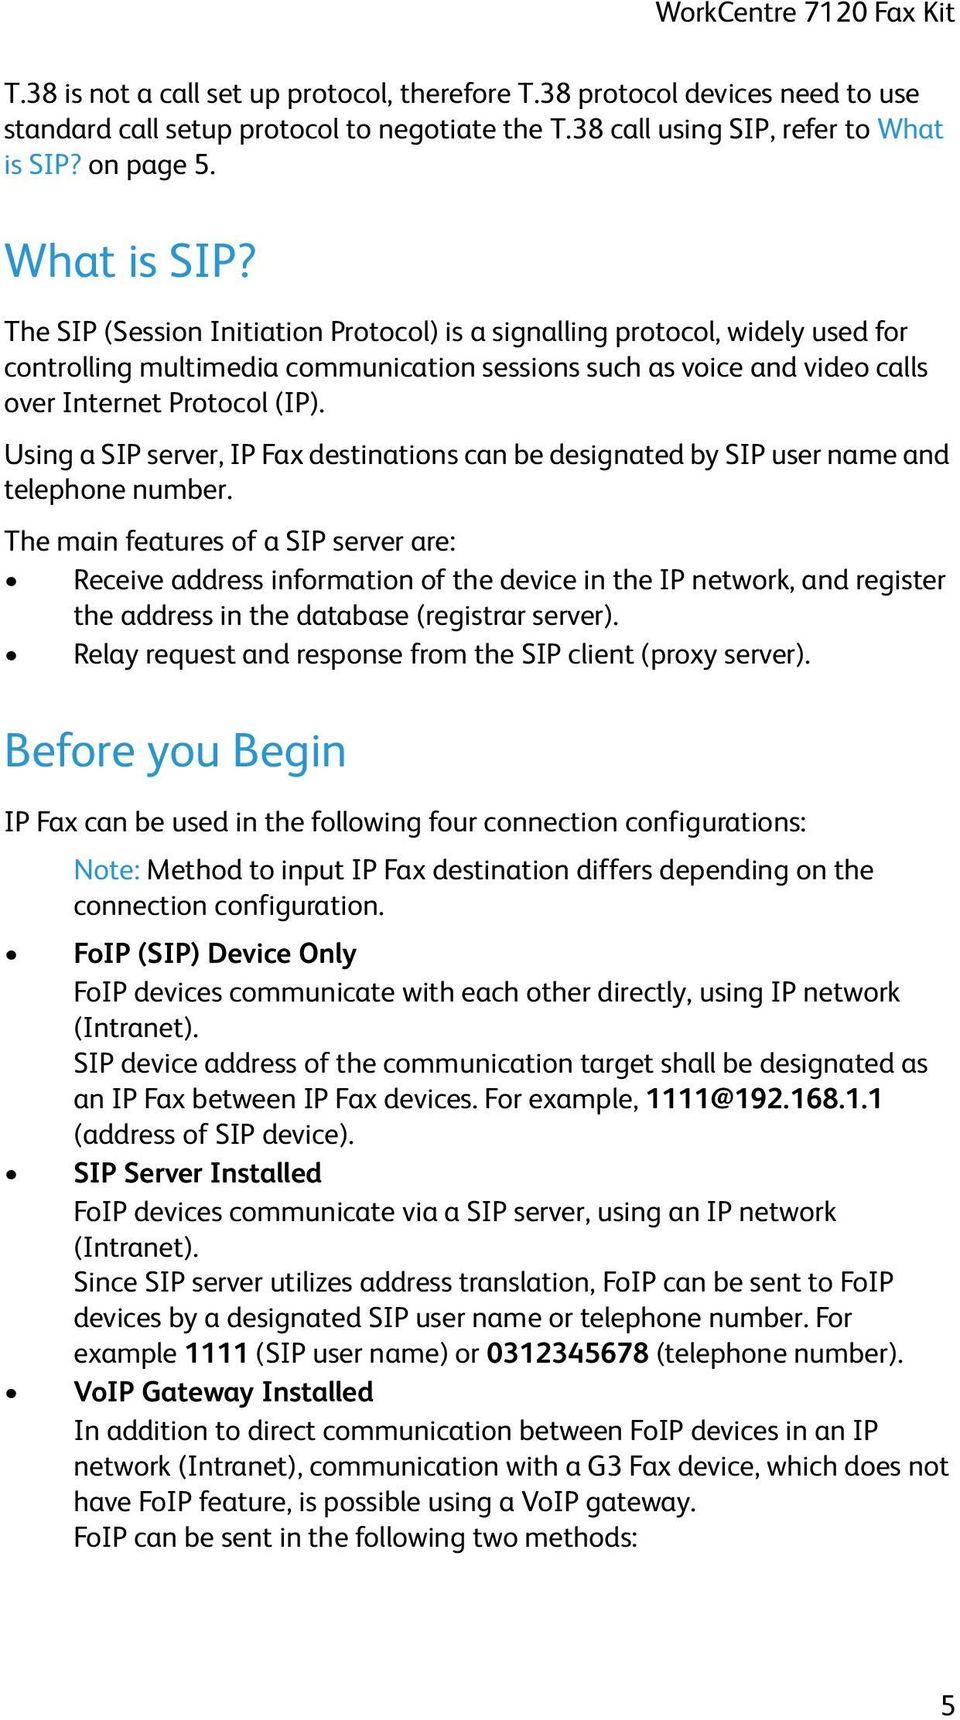 The SIP (Session Initiation Protocol) is a signalling protocol, widely used for controlling multimedia communication sessions such as voice and video calls over Internet Protocol (IP).